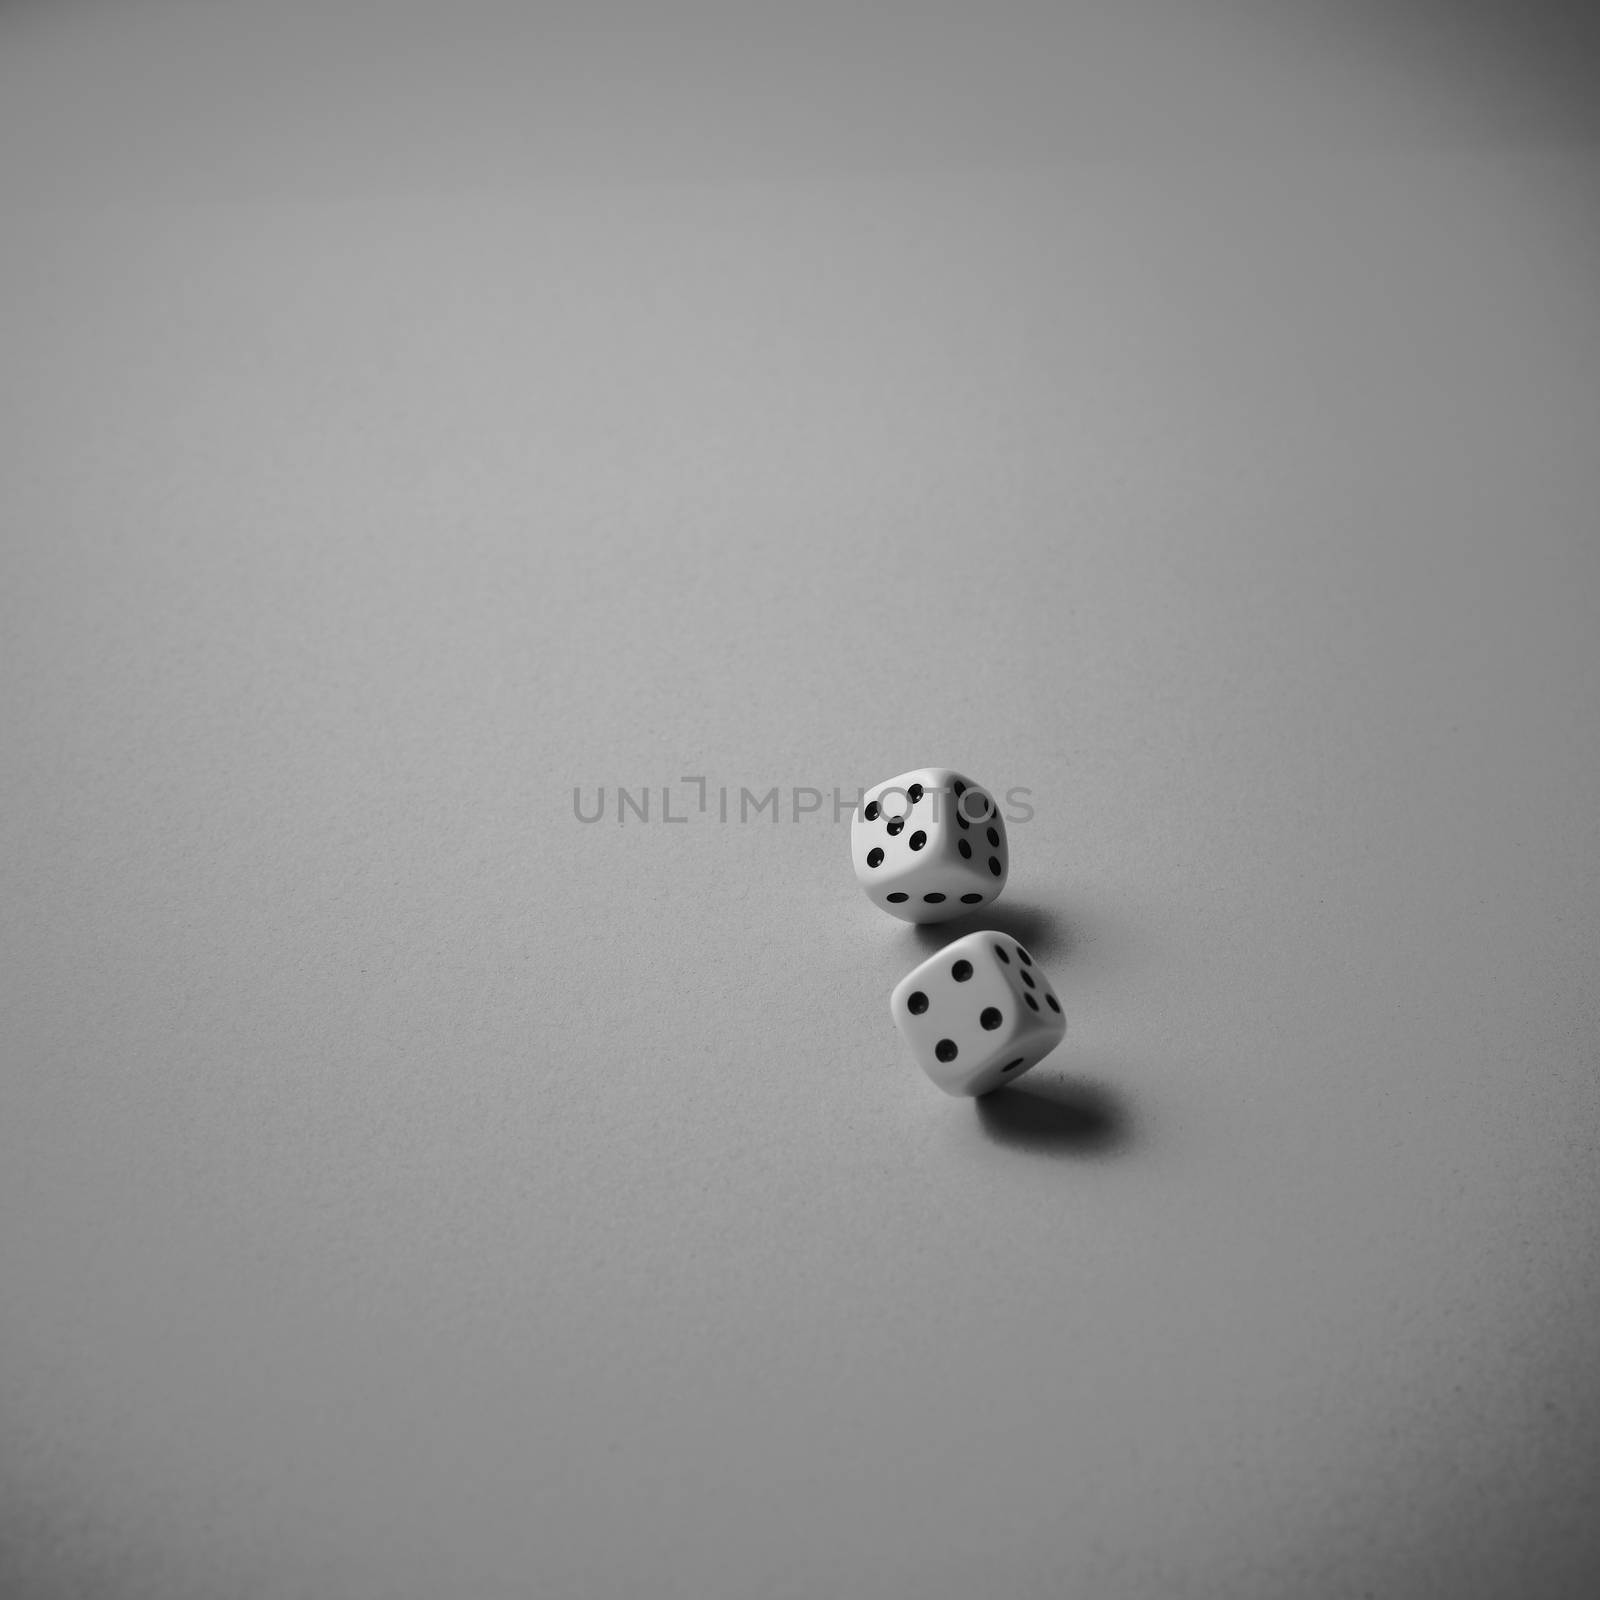 Two dice rolling on white background, black and white, minimalism